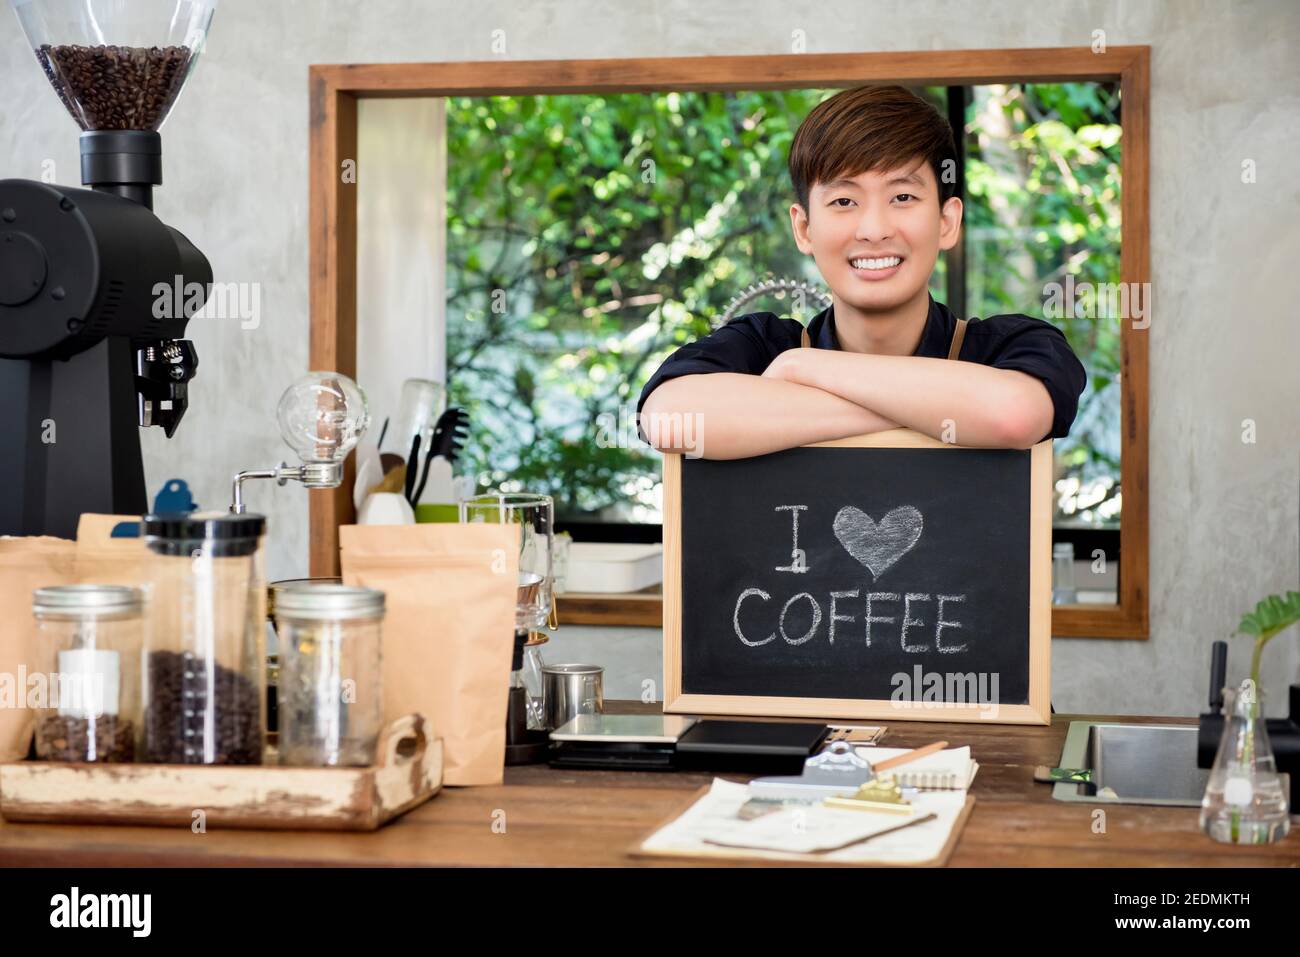 Cheerful young Asian man entrepreneur at counter in his own cafe with I love coffee sign Stock Photo